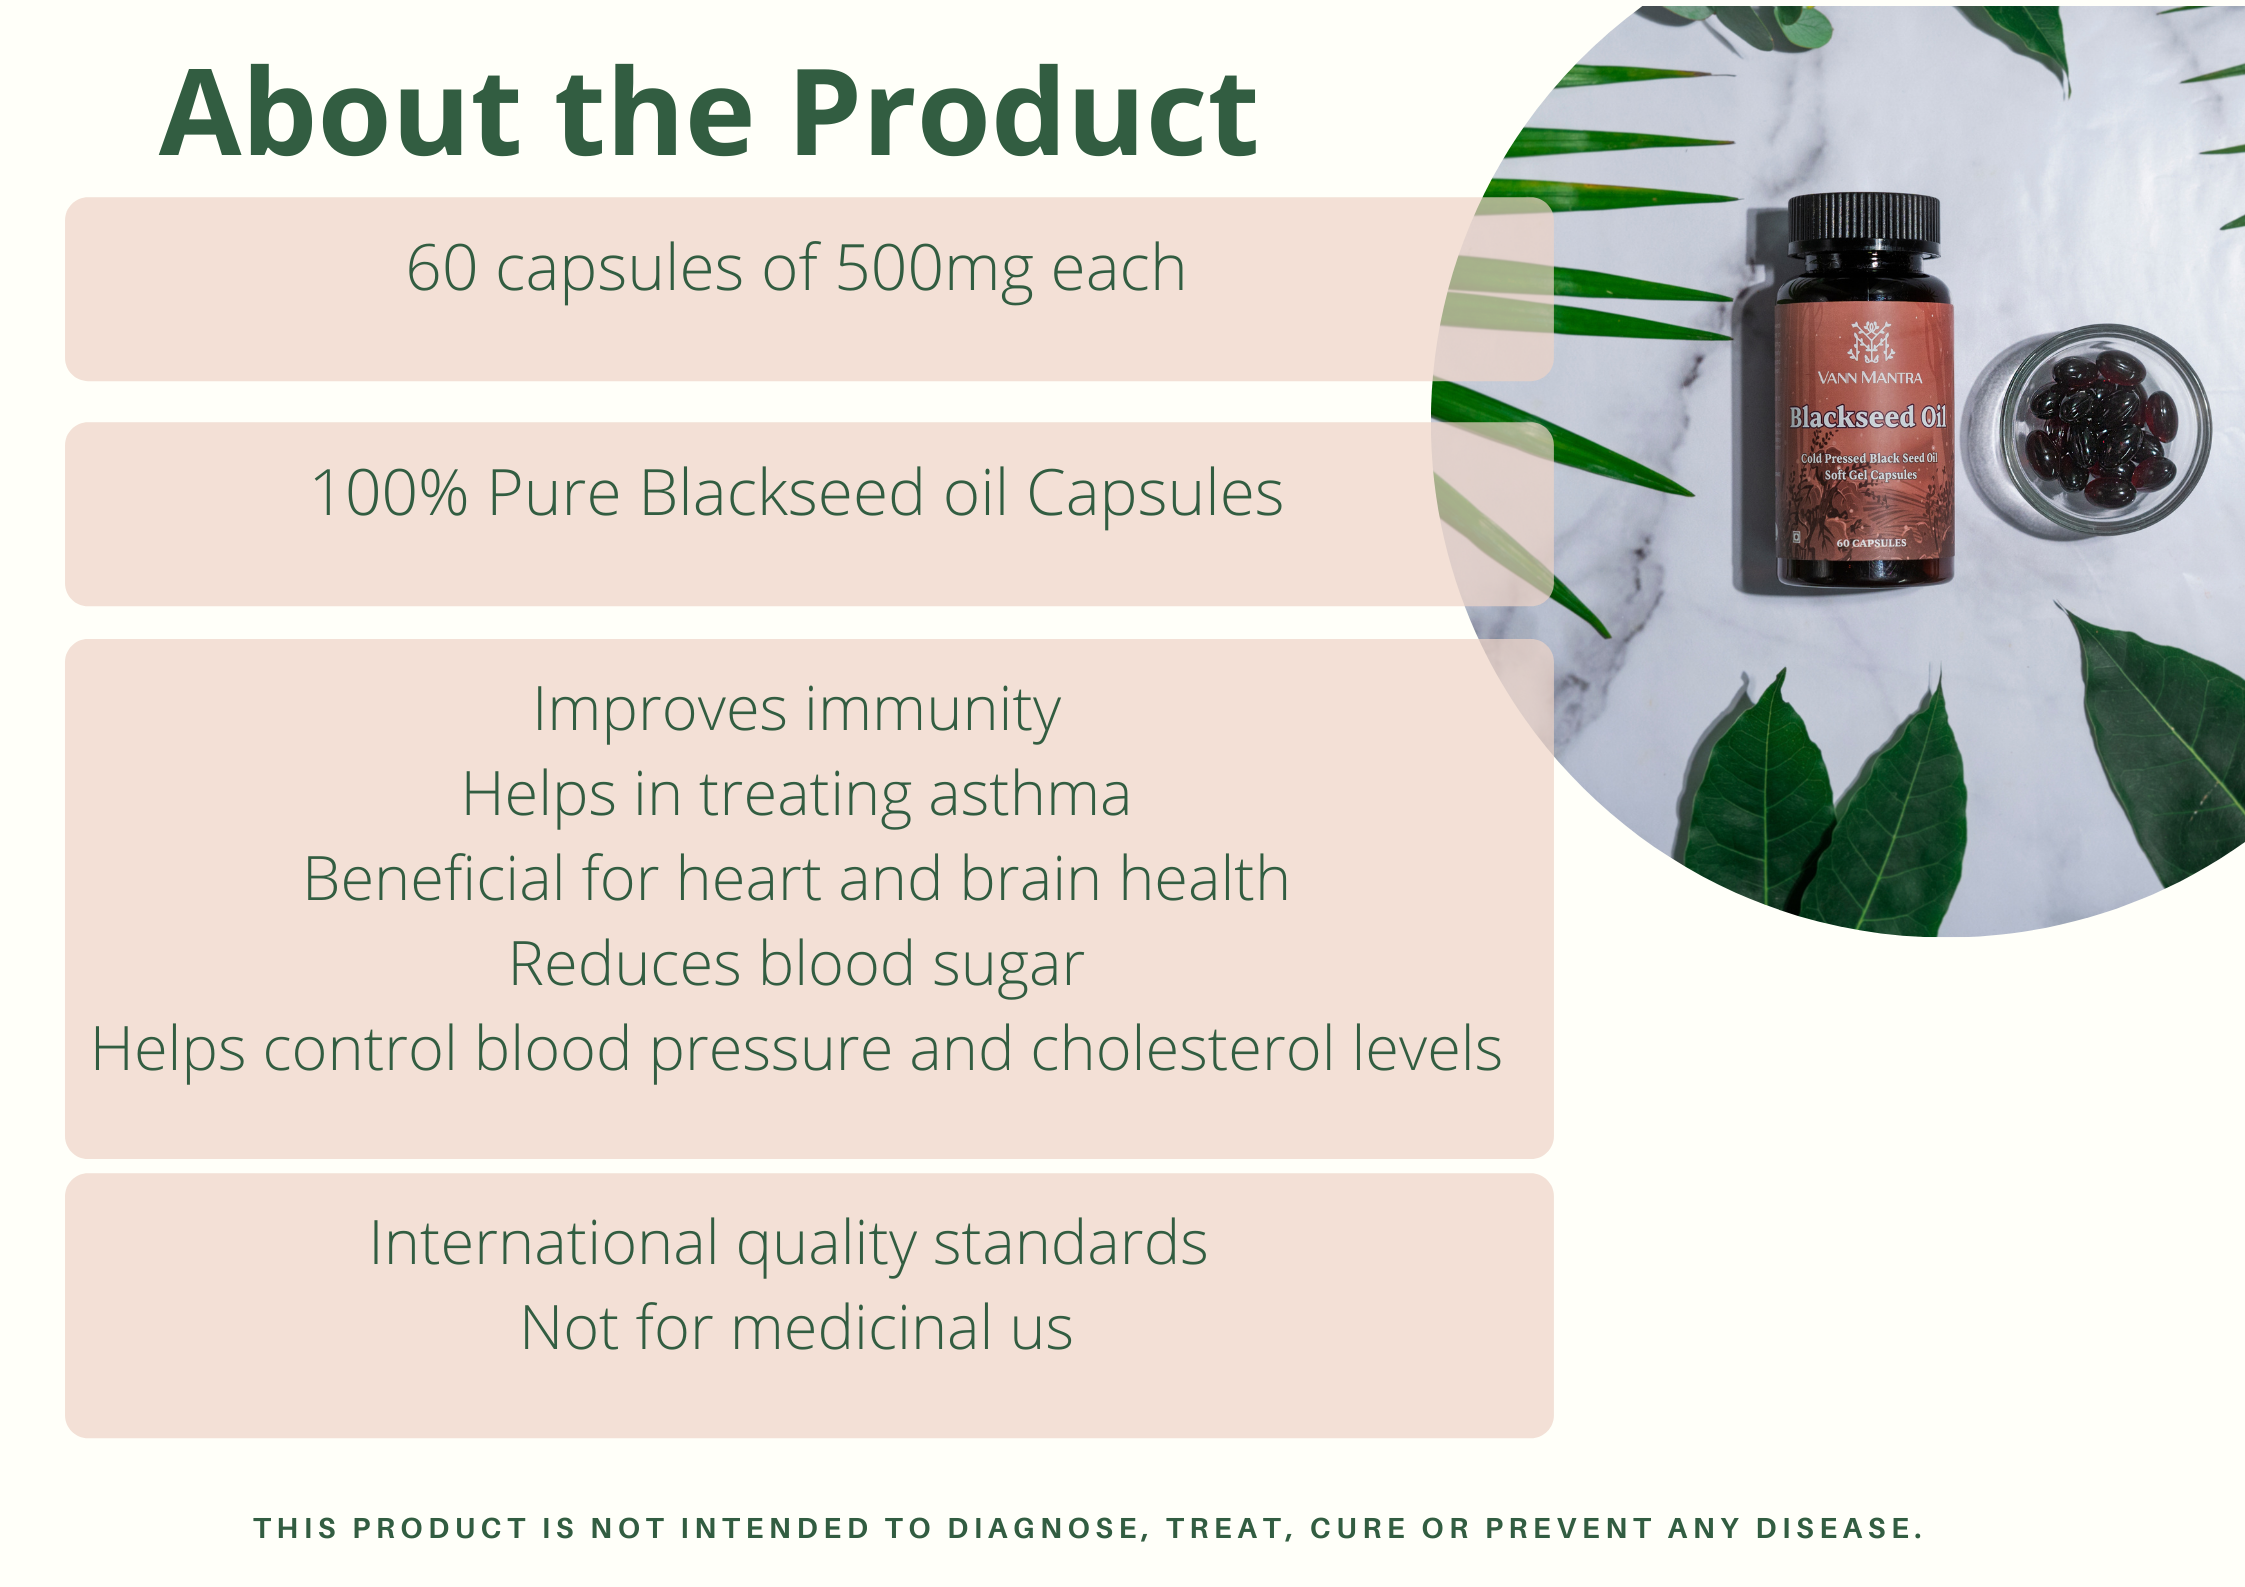 Infographic explaining the features and benefits of Blackseed Oil Capsule. 